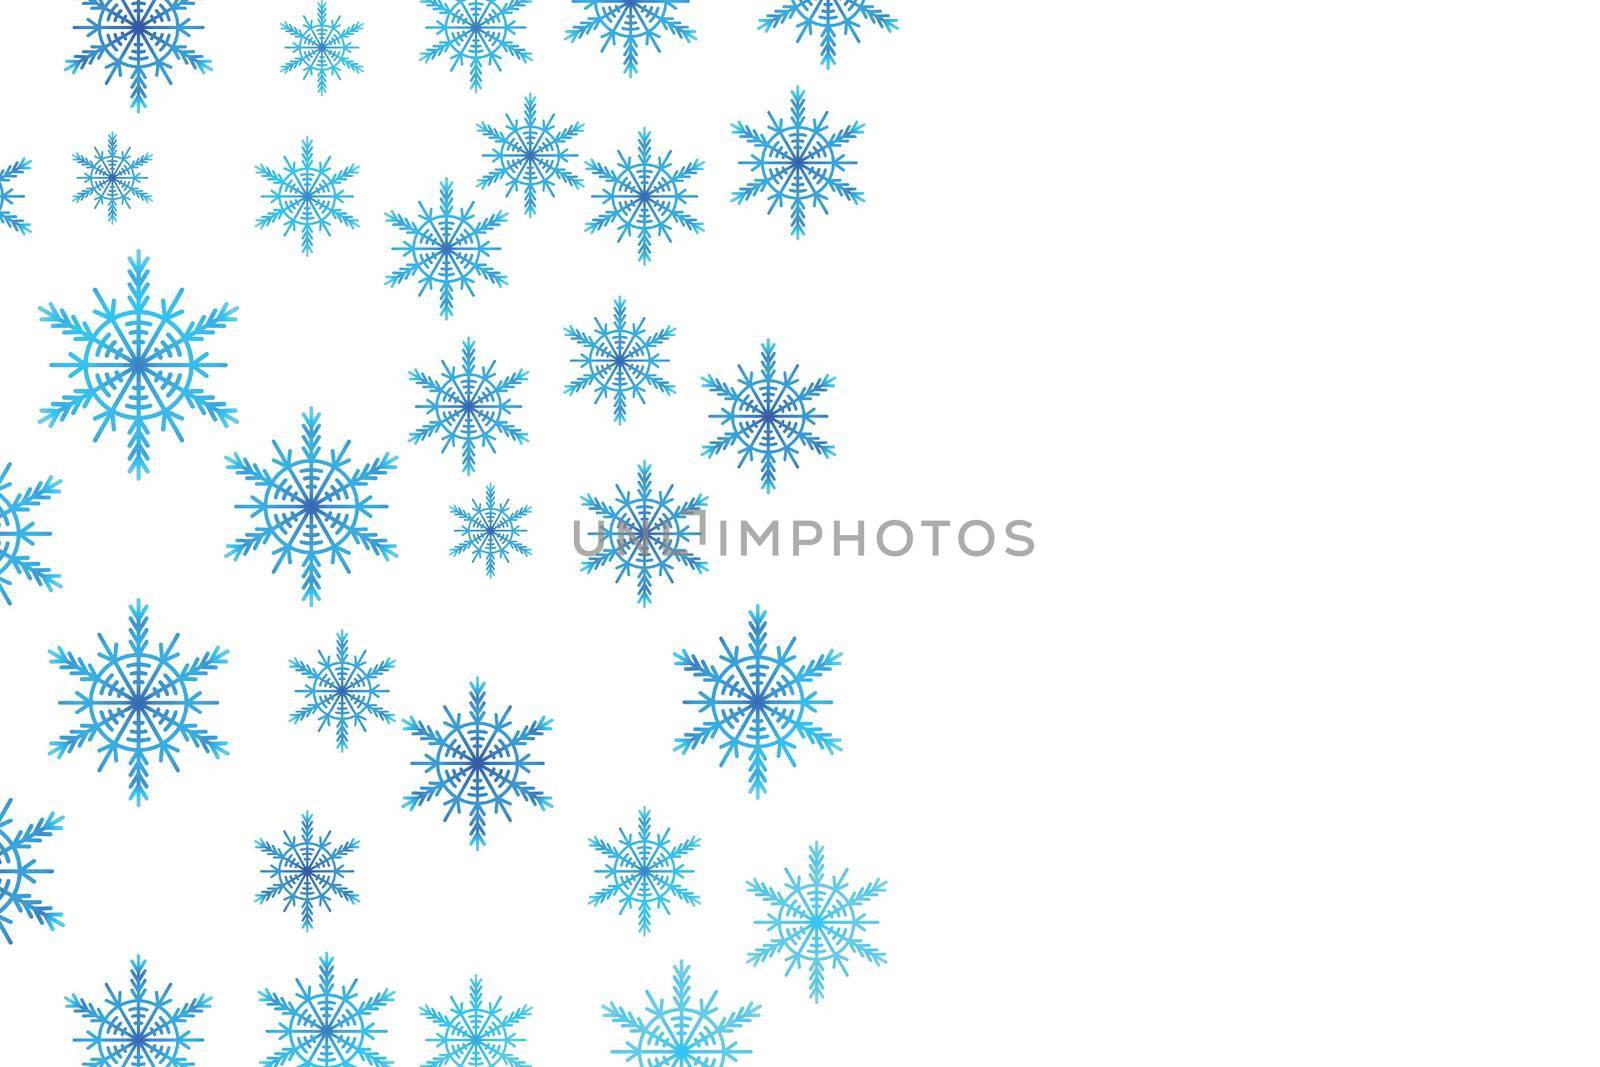 Christmas card with blue snowflakes on white background. Isolated snowflakes icon. Empty paper shape. Winter cartoon flat illustration. Copy space. Holiday pattern, banner, frame, greeting card design